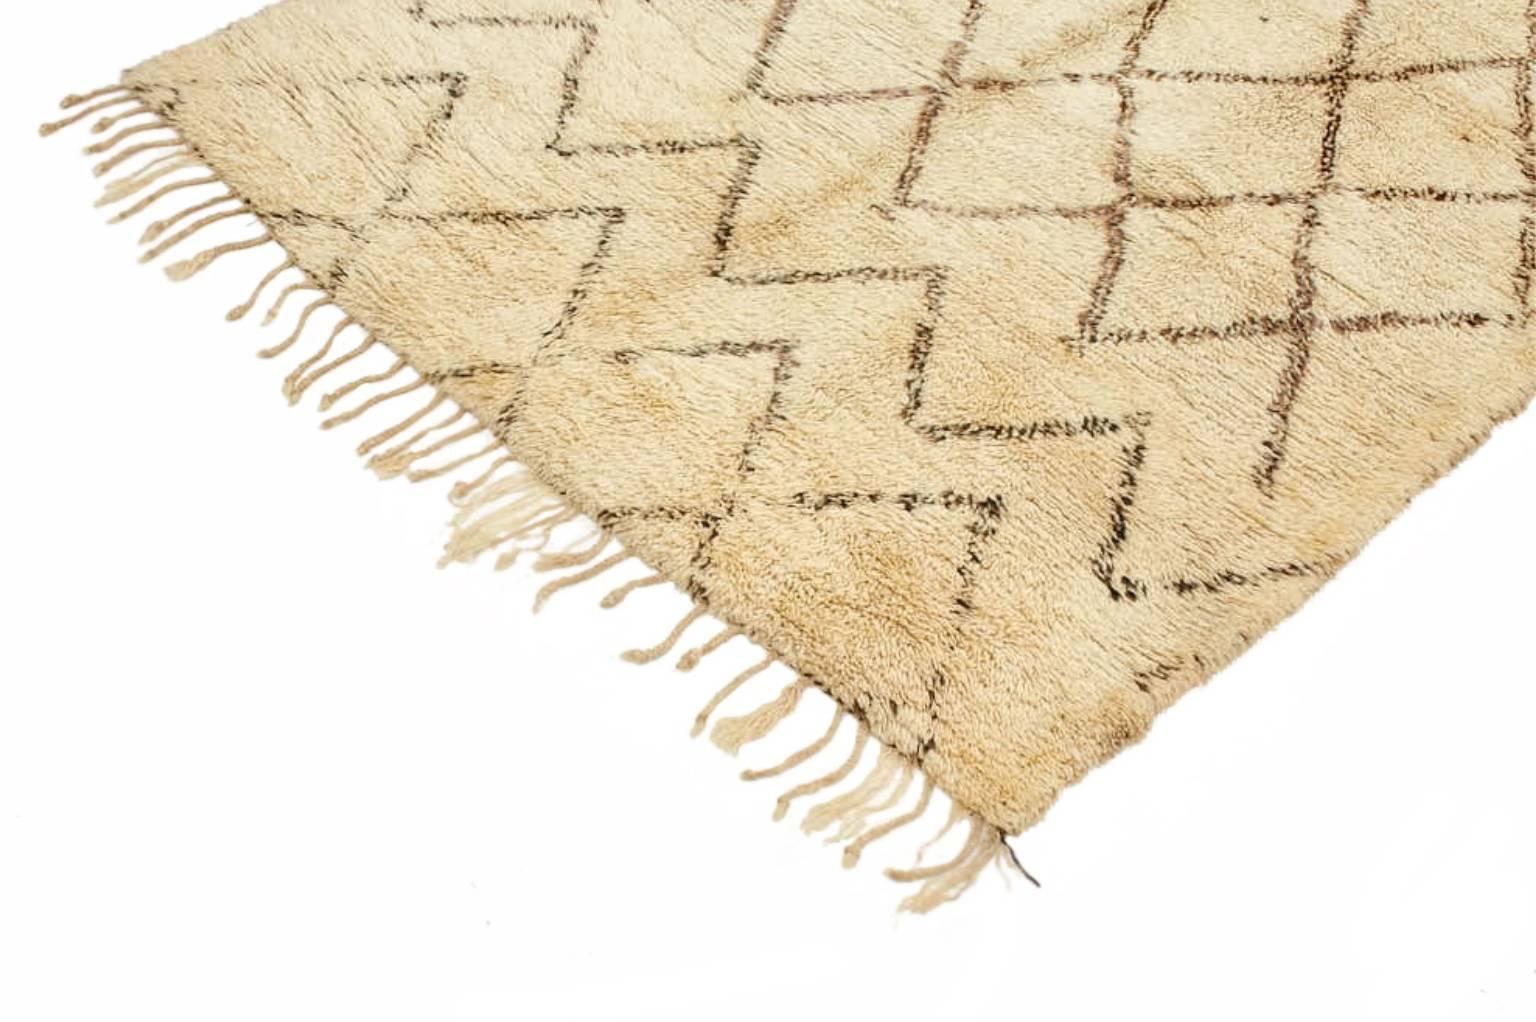 Individually selected by Madeline during her travels, this timeless carpet has been made in the Atlas mountains of Morocco by the Beni Ourian and Berber tribes. Hand-knotted with hand-spun wool.